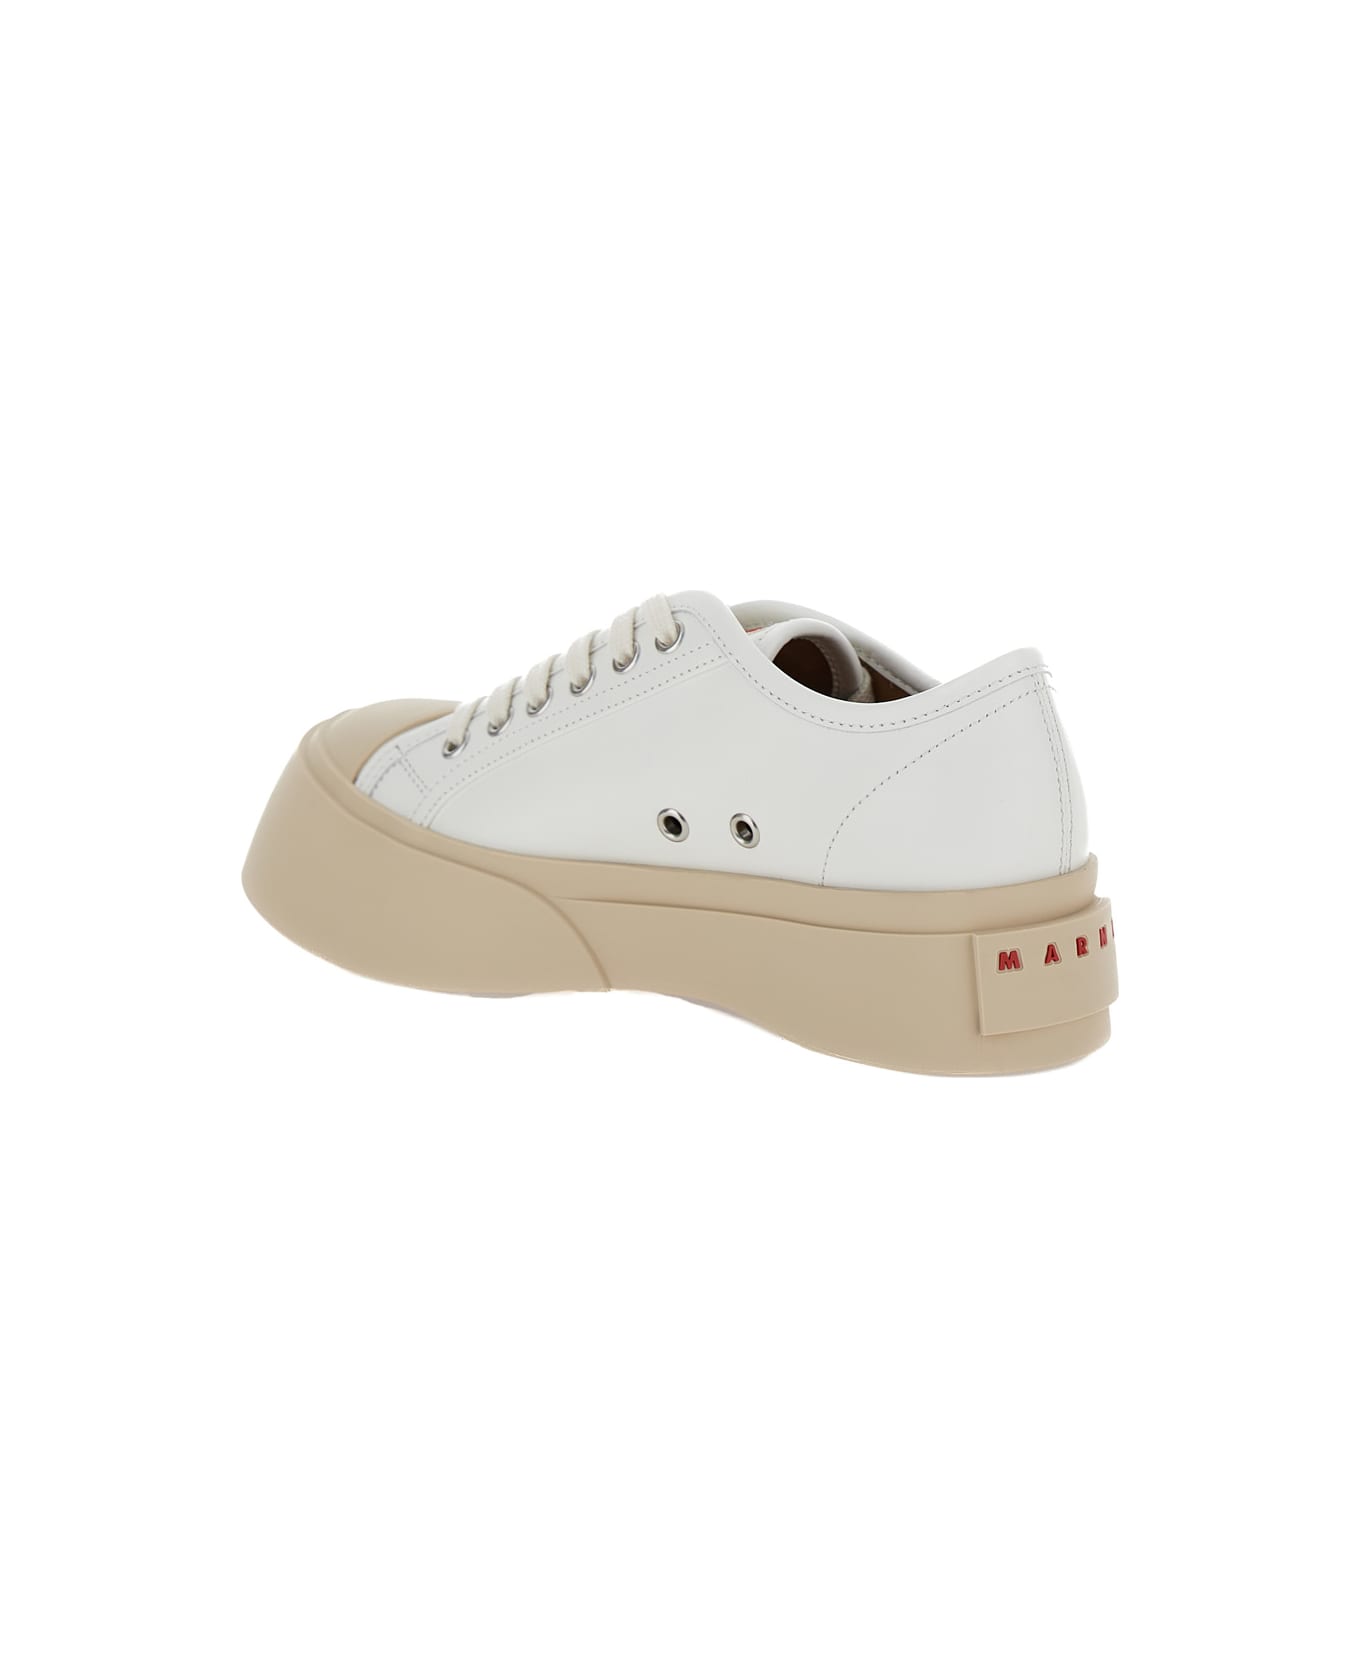 Marni 'pablo' White Sneakers With Lace Up Closure In Leather Woman - White スニーカー